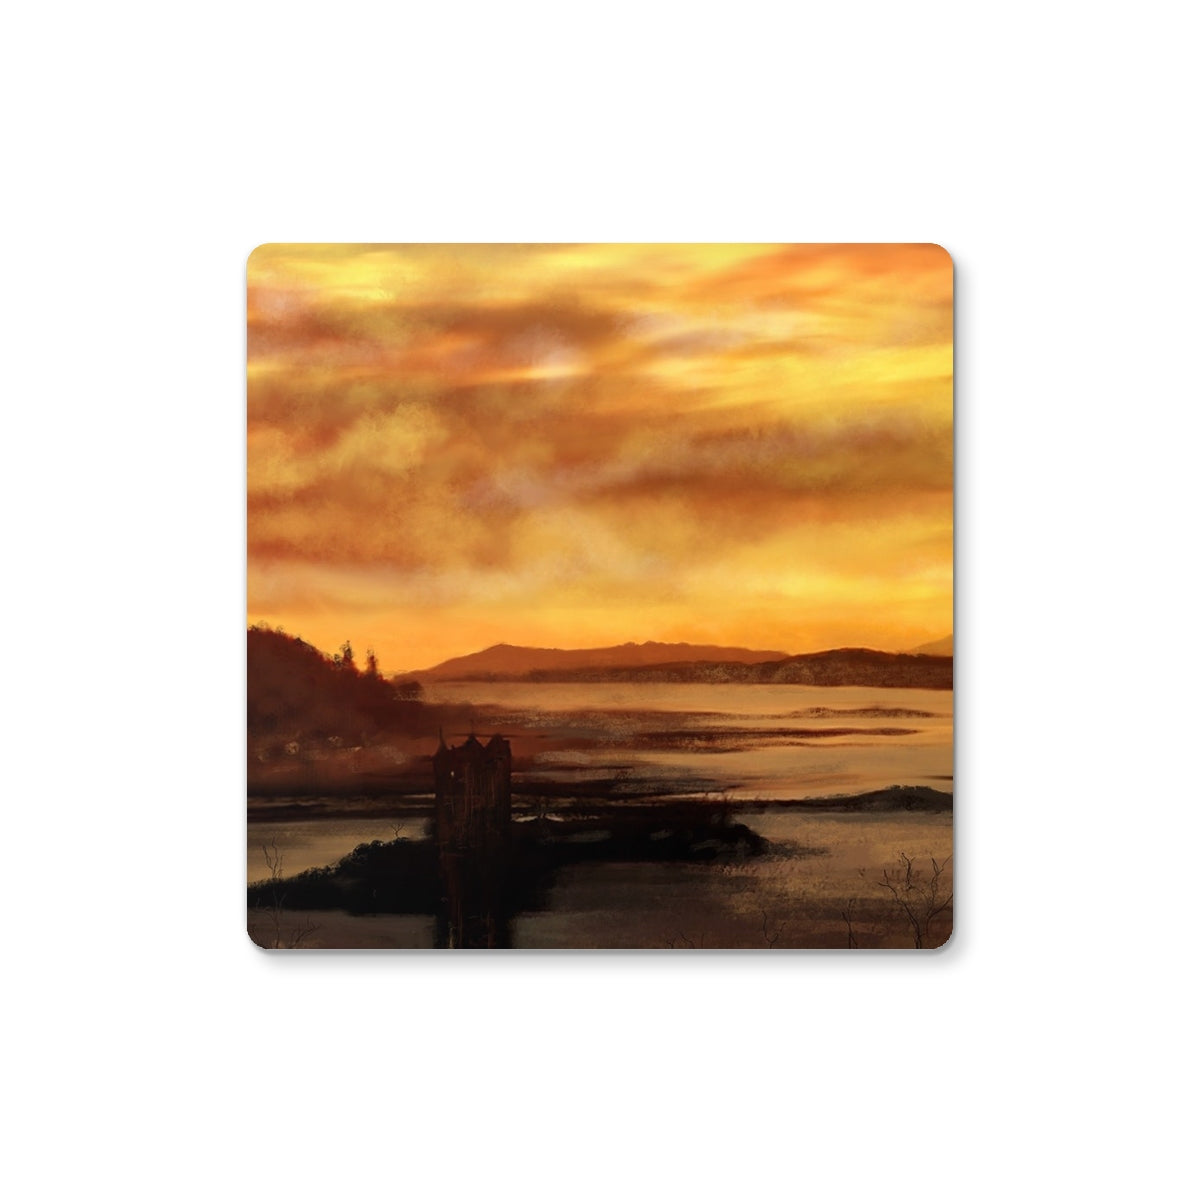 Castle Stalker Dusk Art Gifts Coaster-Coasters-Historic & Iconic Scotland Art Gallery-Single Coaster-Paintings, Prints, Homeware, Art Gifts From Scotland By Scottish Artist Kevin Hunter